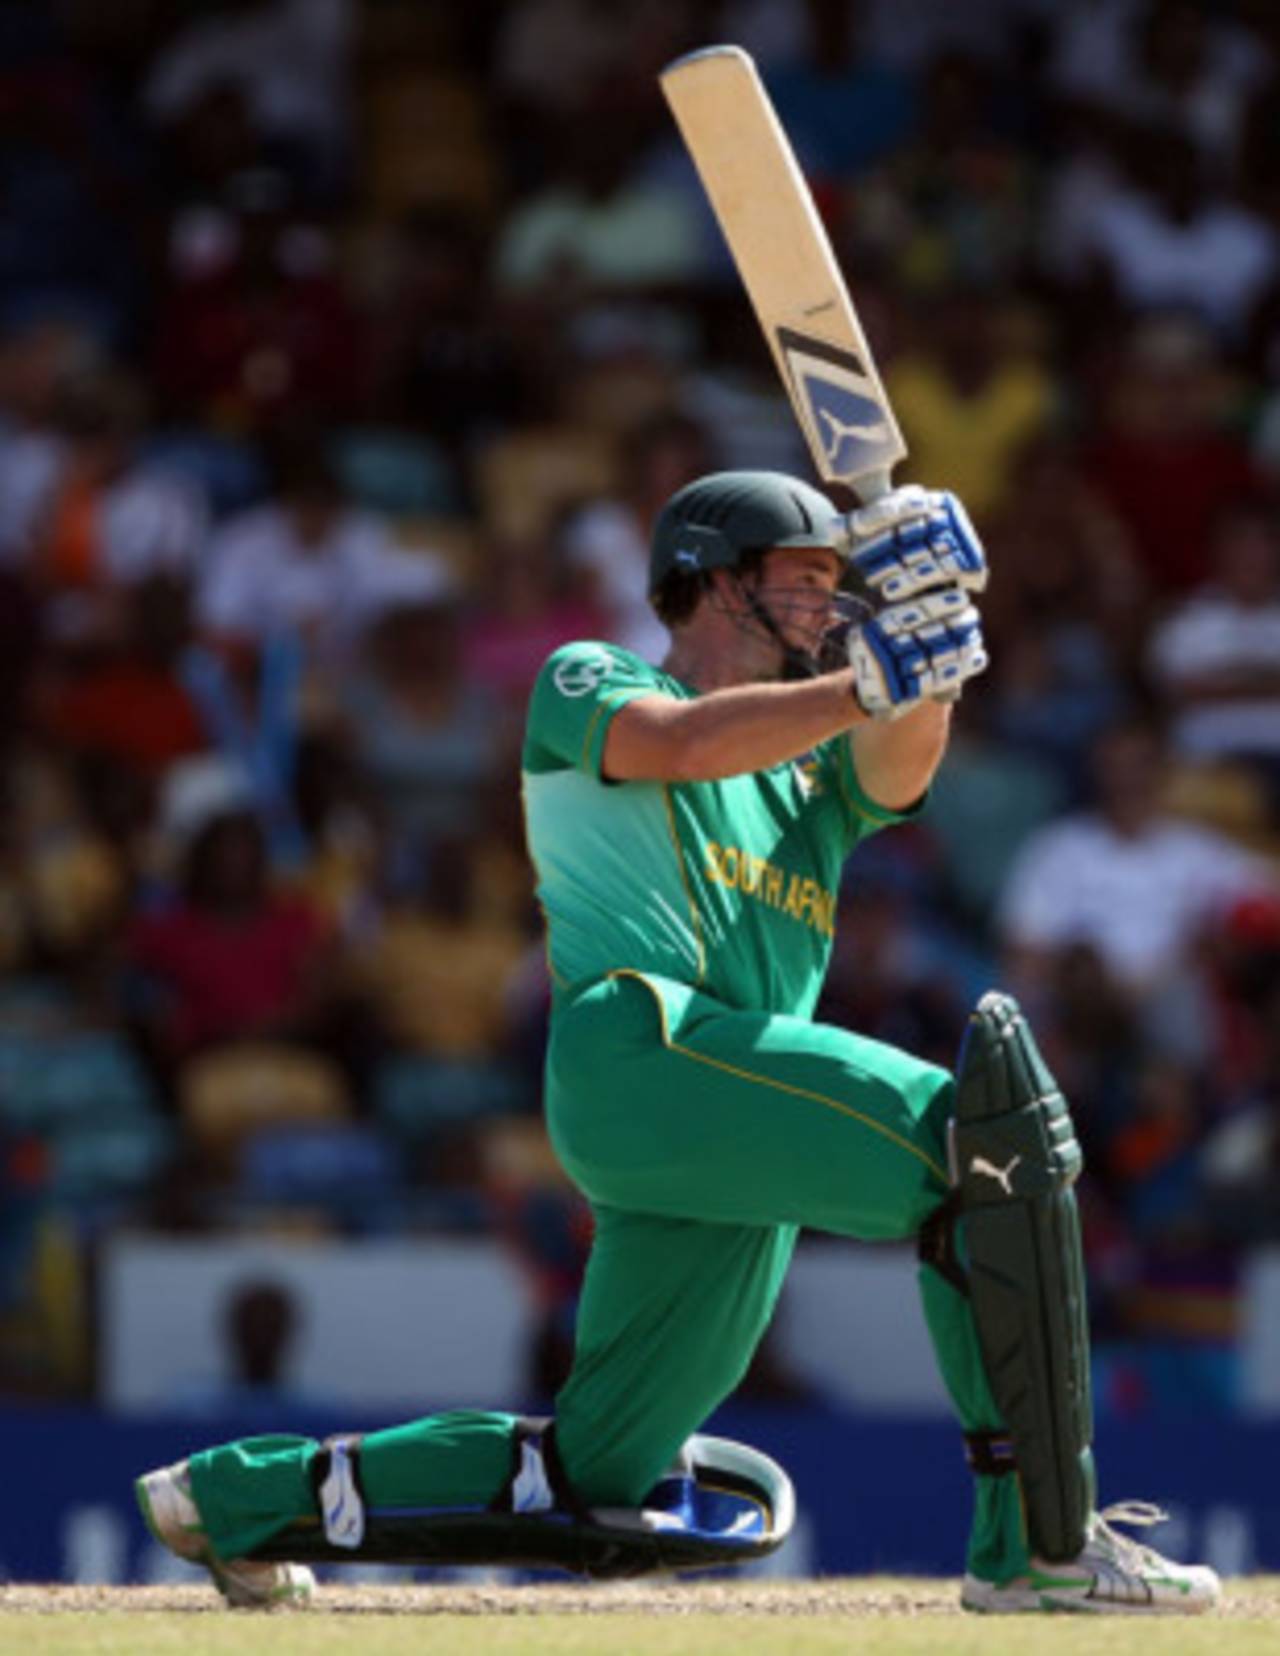 Albie Morkel's batting was the difference for South Africa, New Zealand v South Africa, Group E, Bridgetown, May 6, 2010

